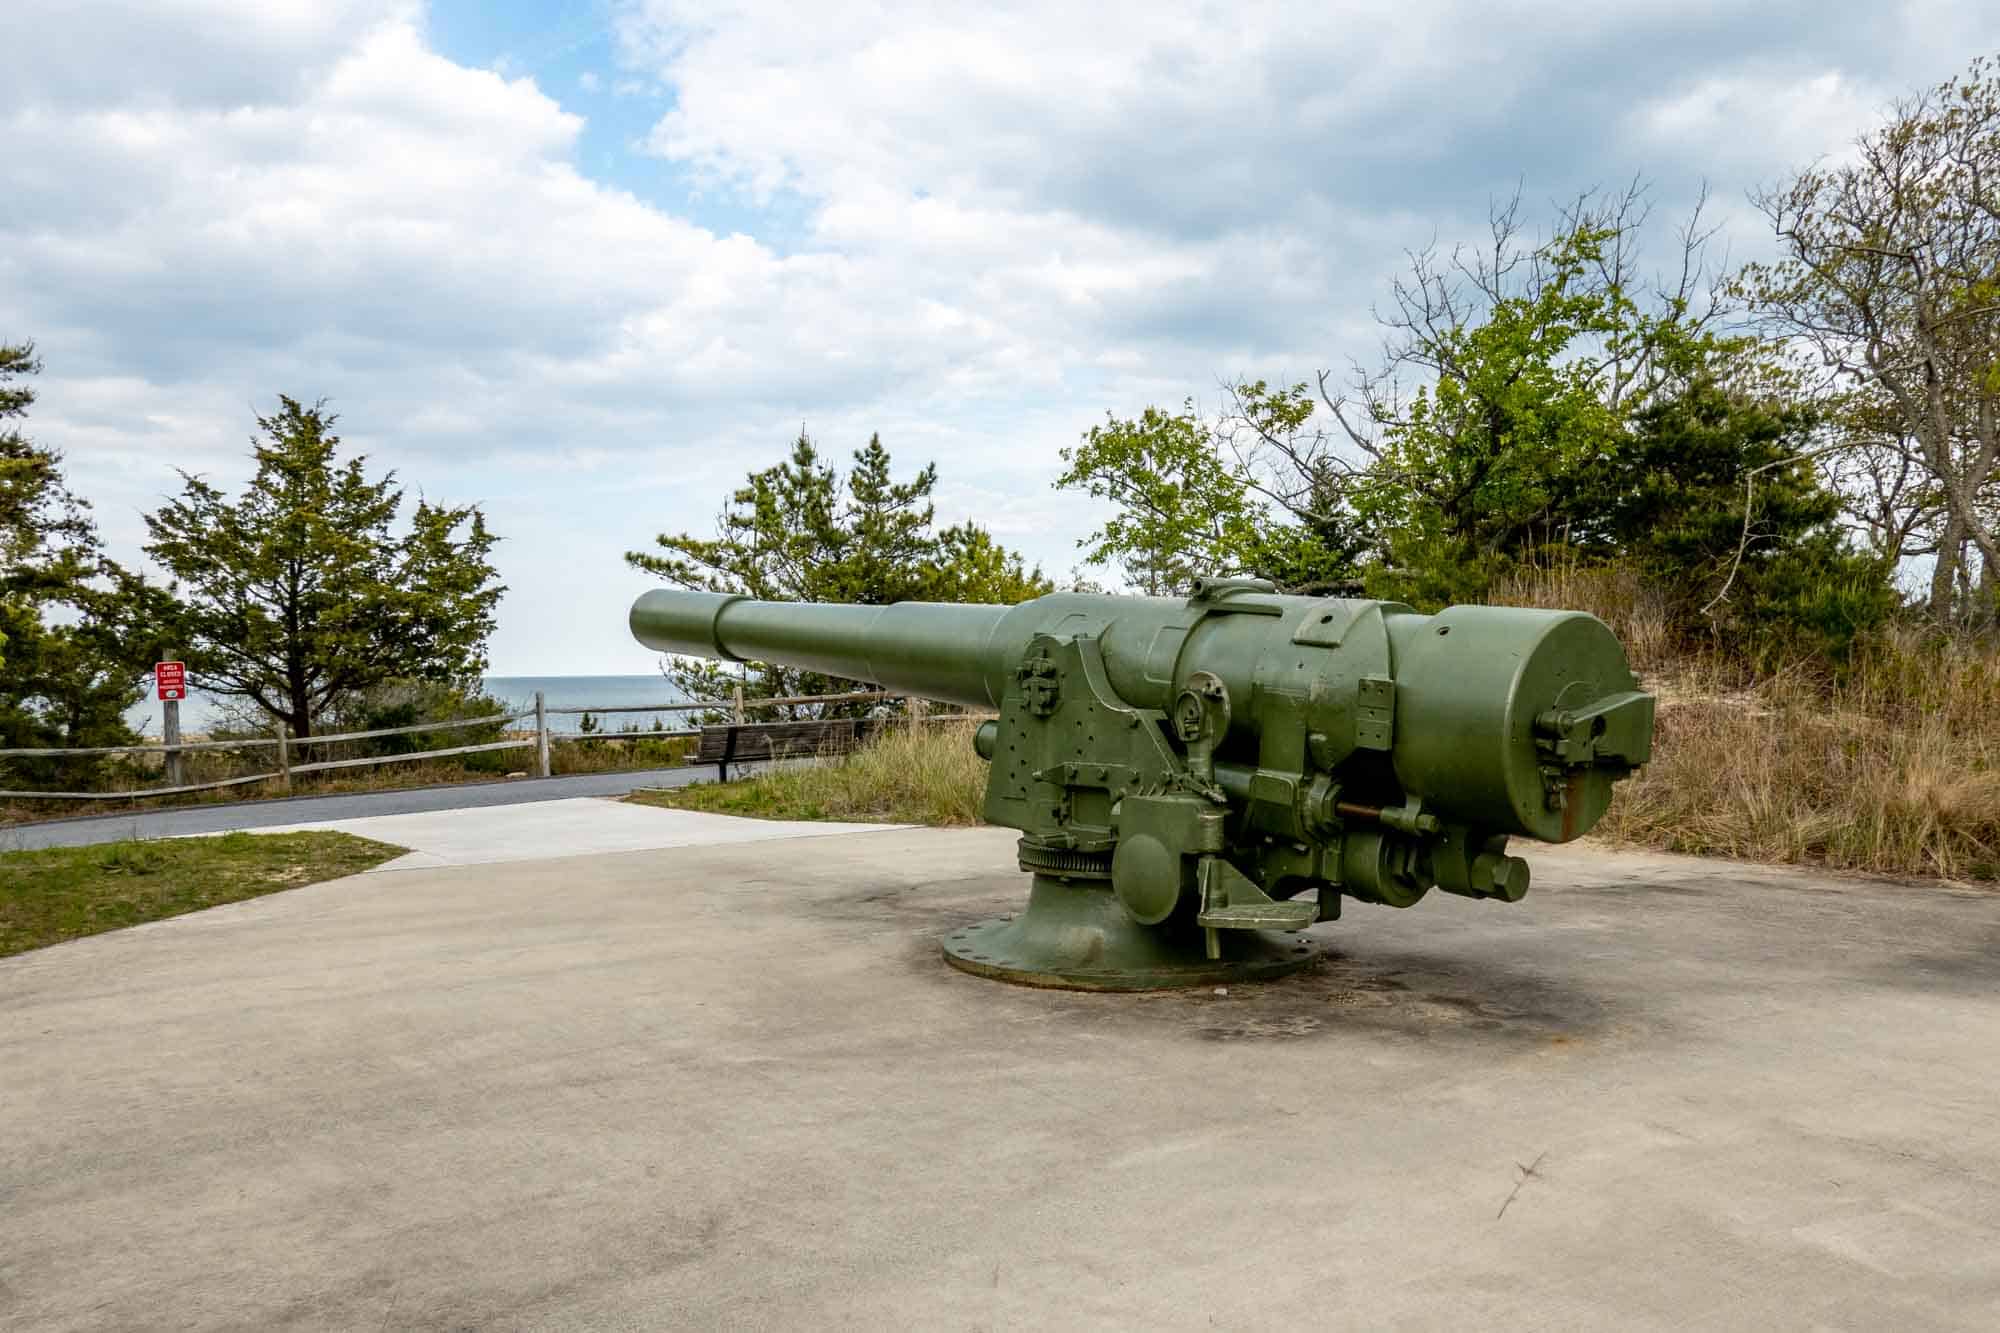 Large piece of World War II artillery on display outdoors